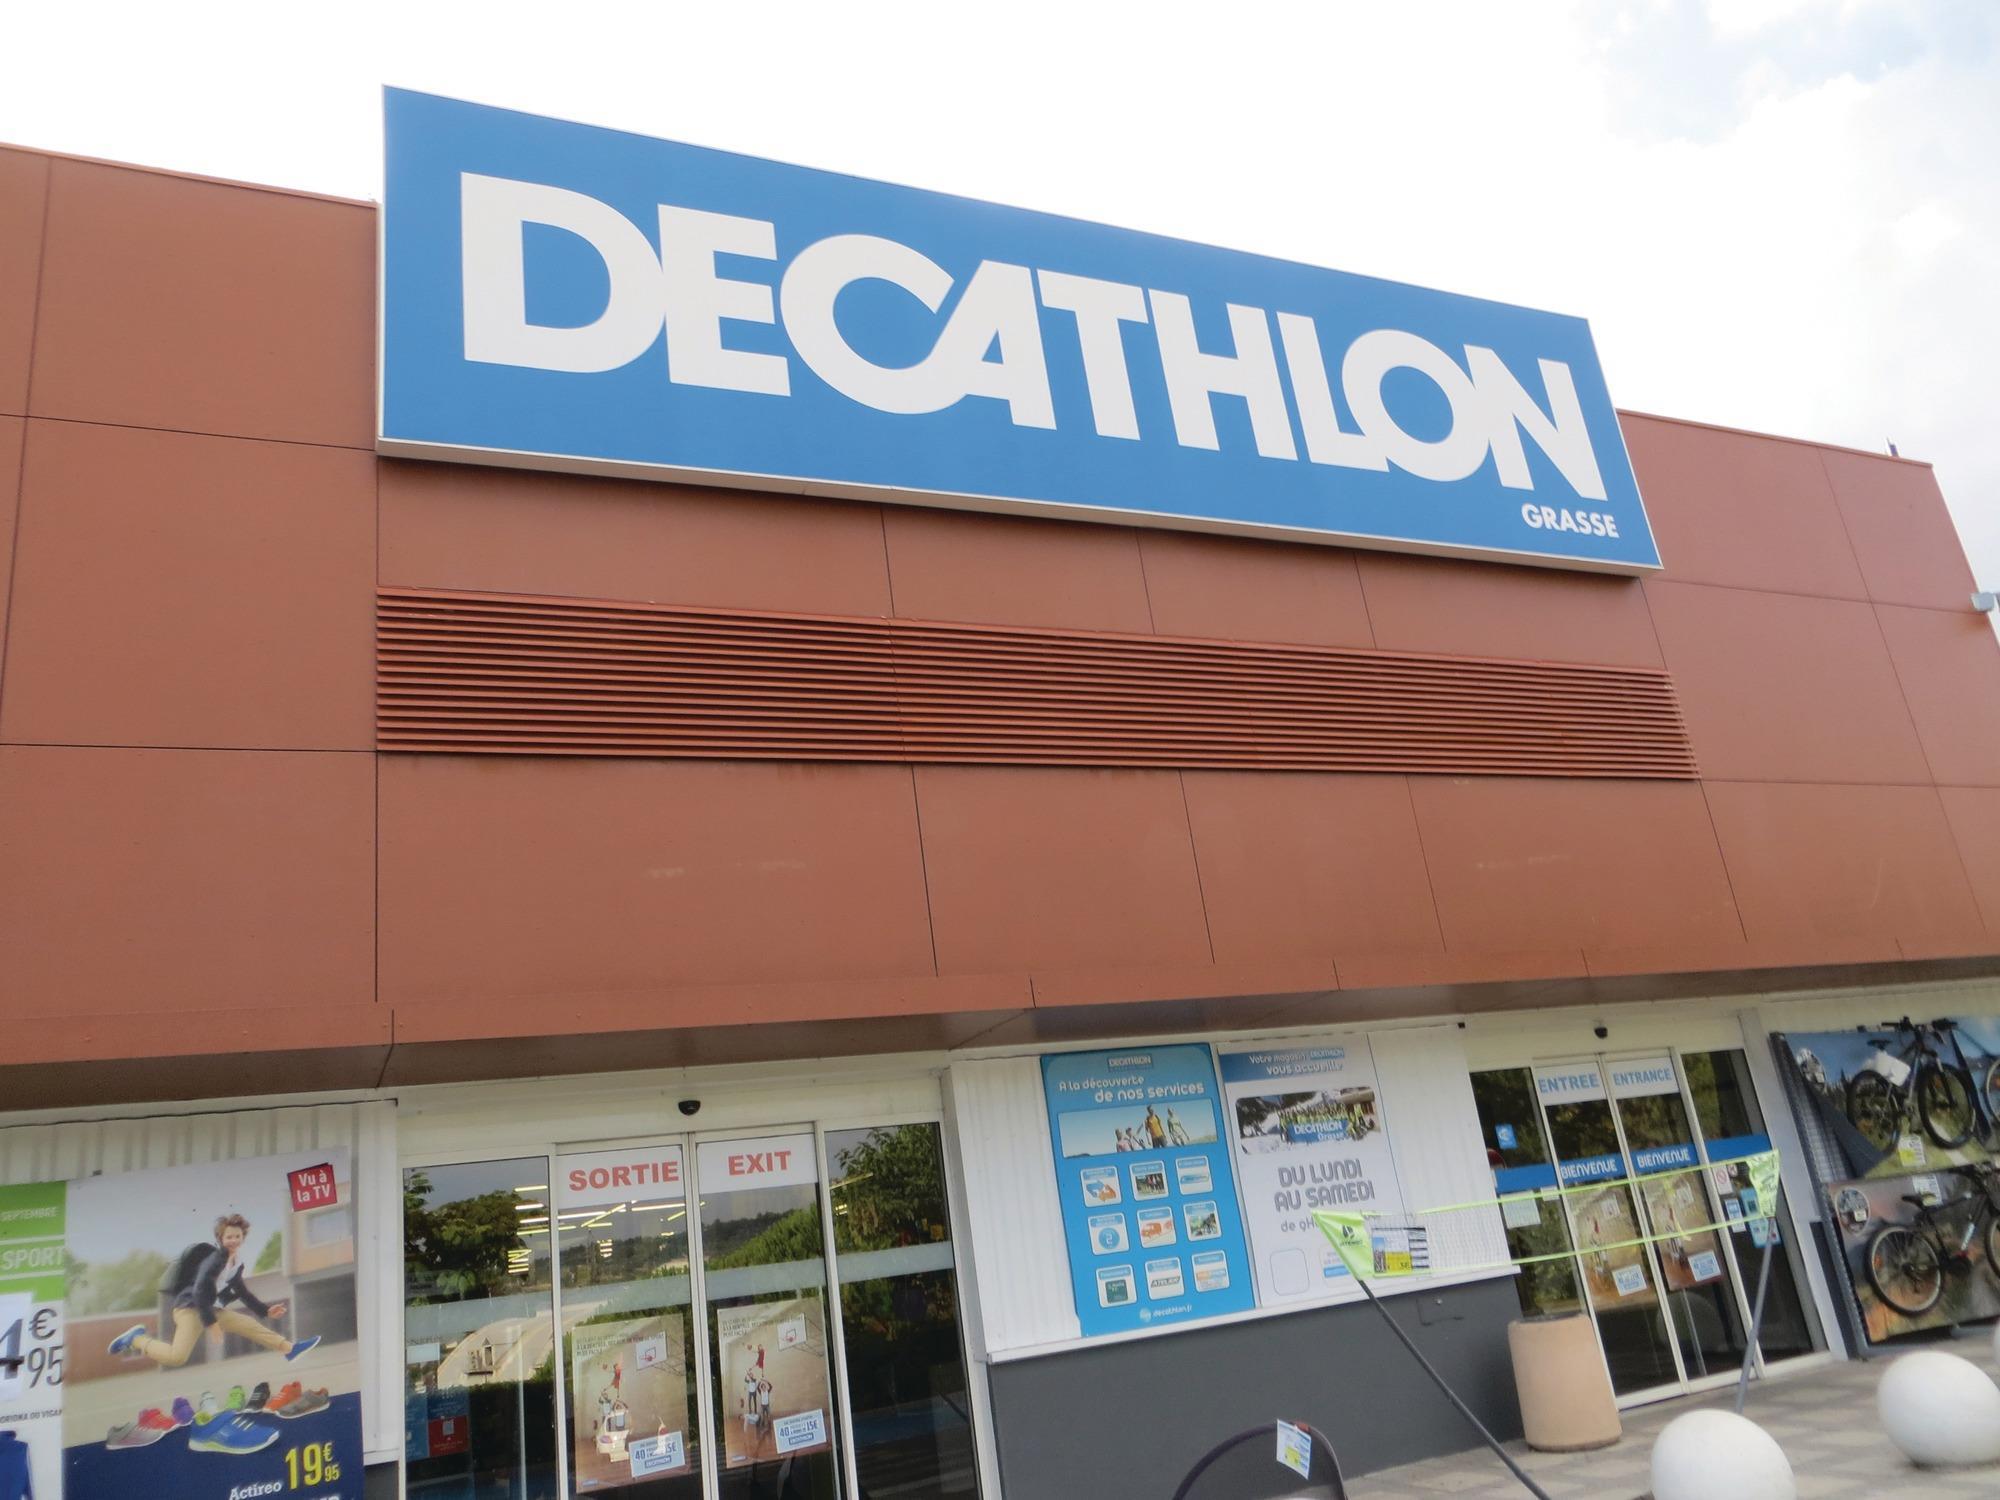 DECATHLON stores: small and large blue boxes